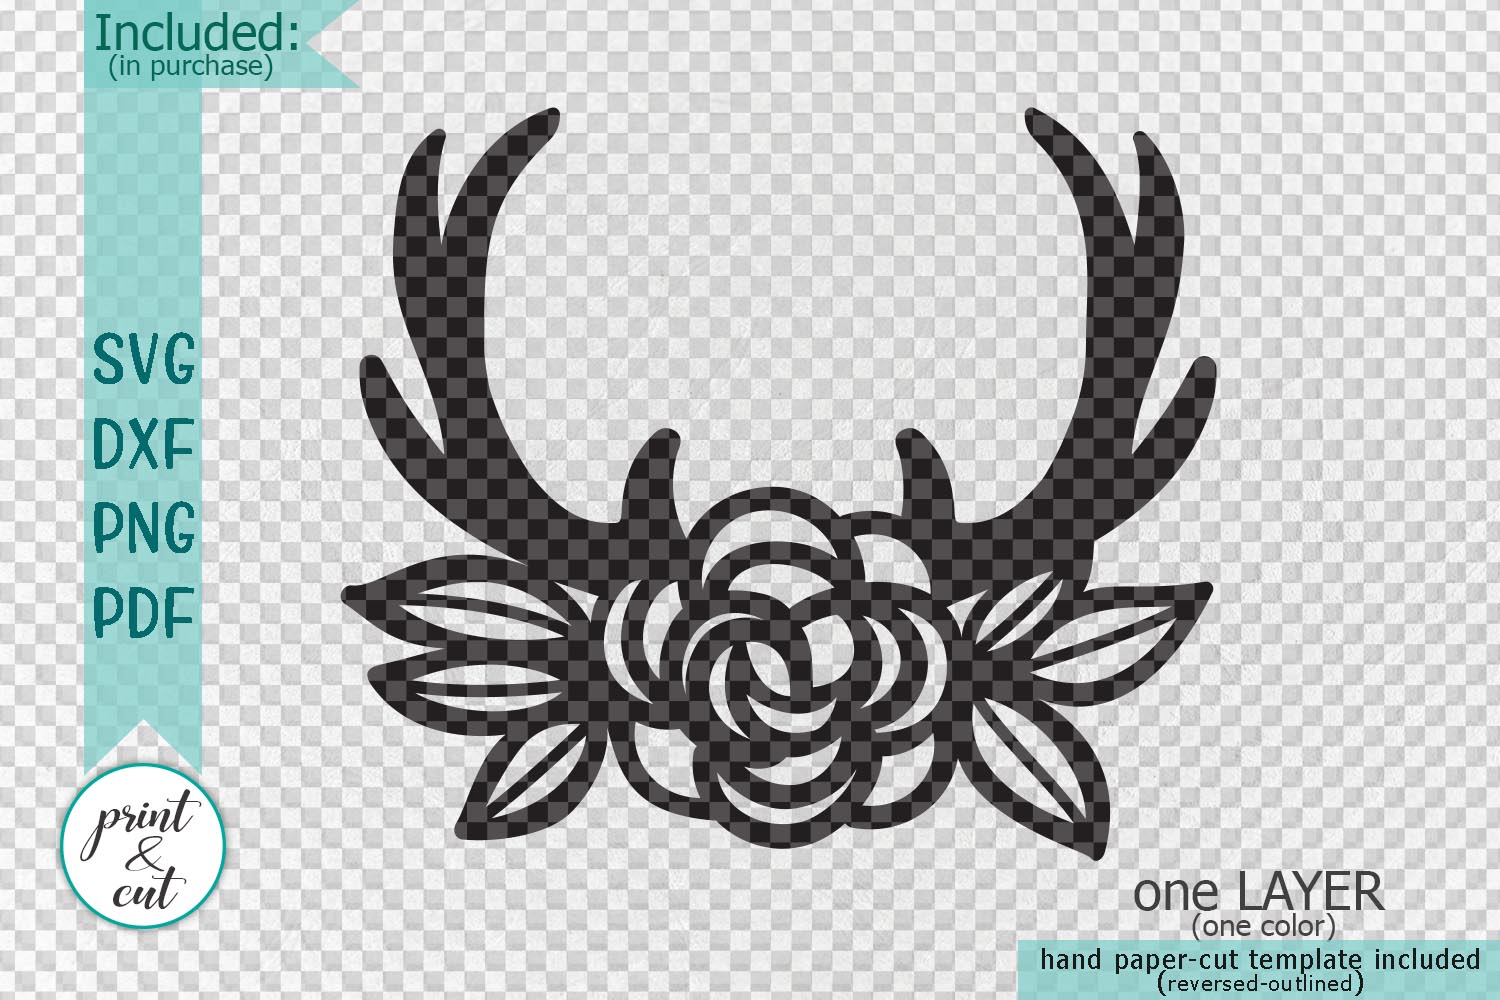 Download Floral Deer antlers laser cut papercutting template dxf svg